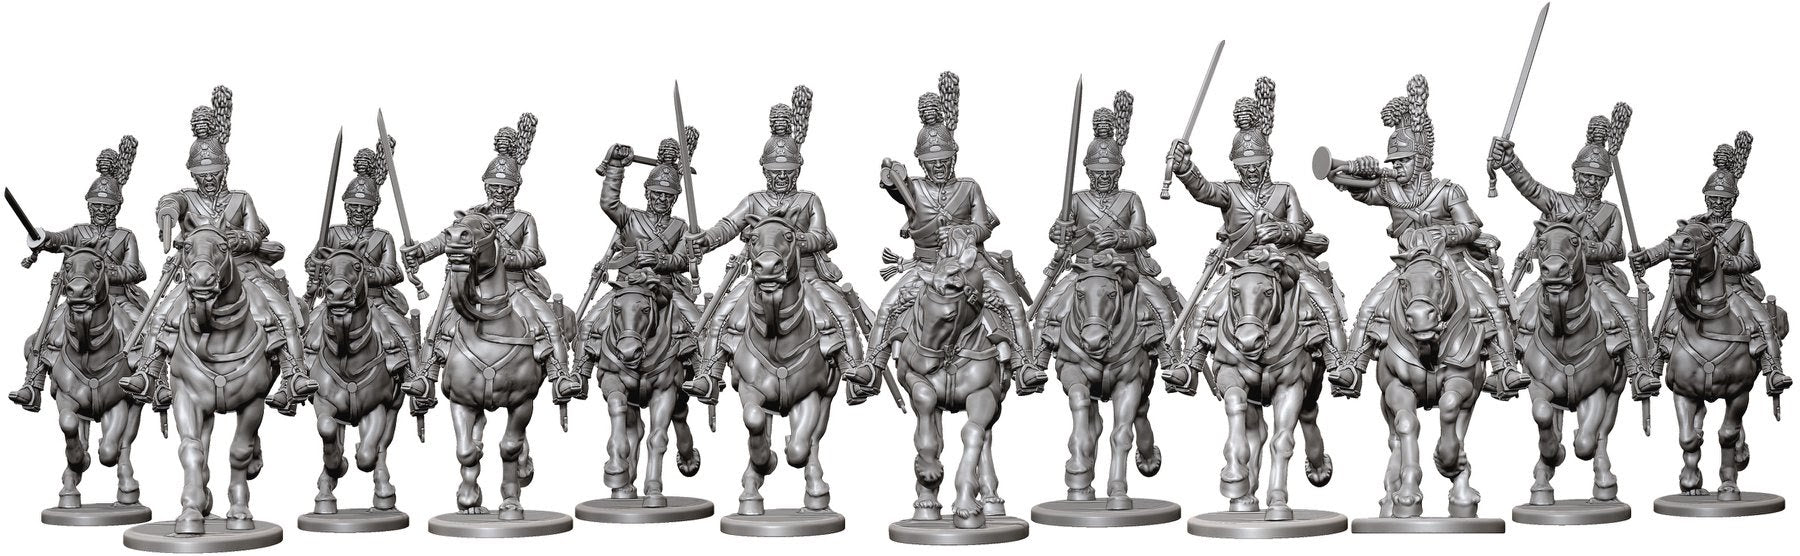 Upcoming Release: British Household Cavalry